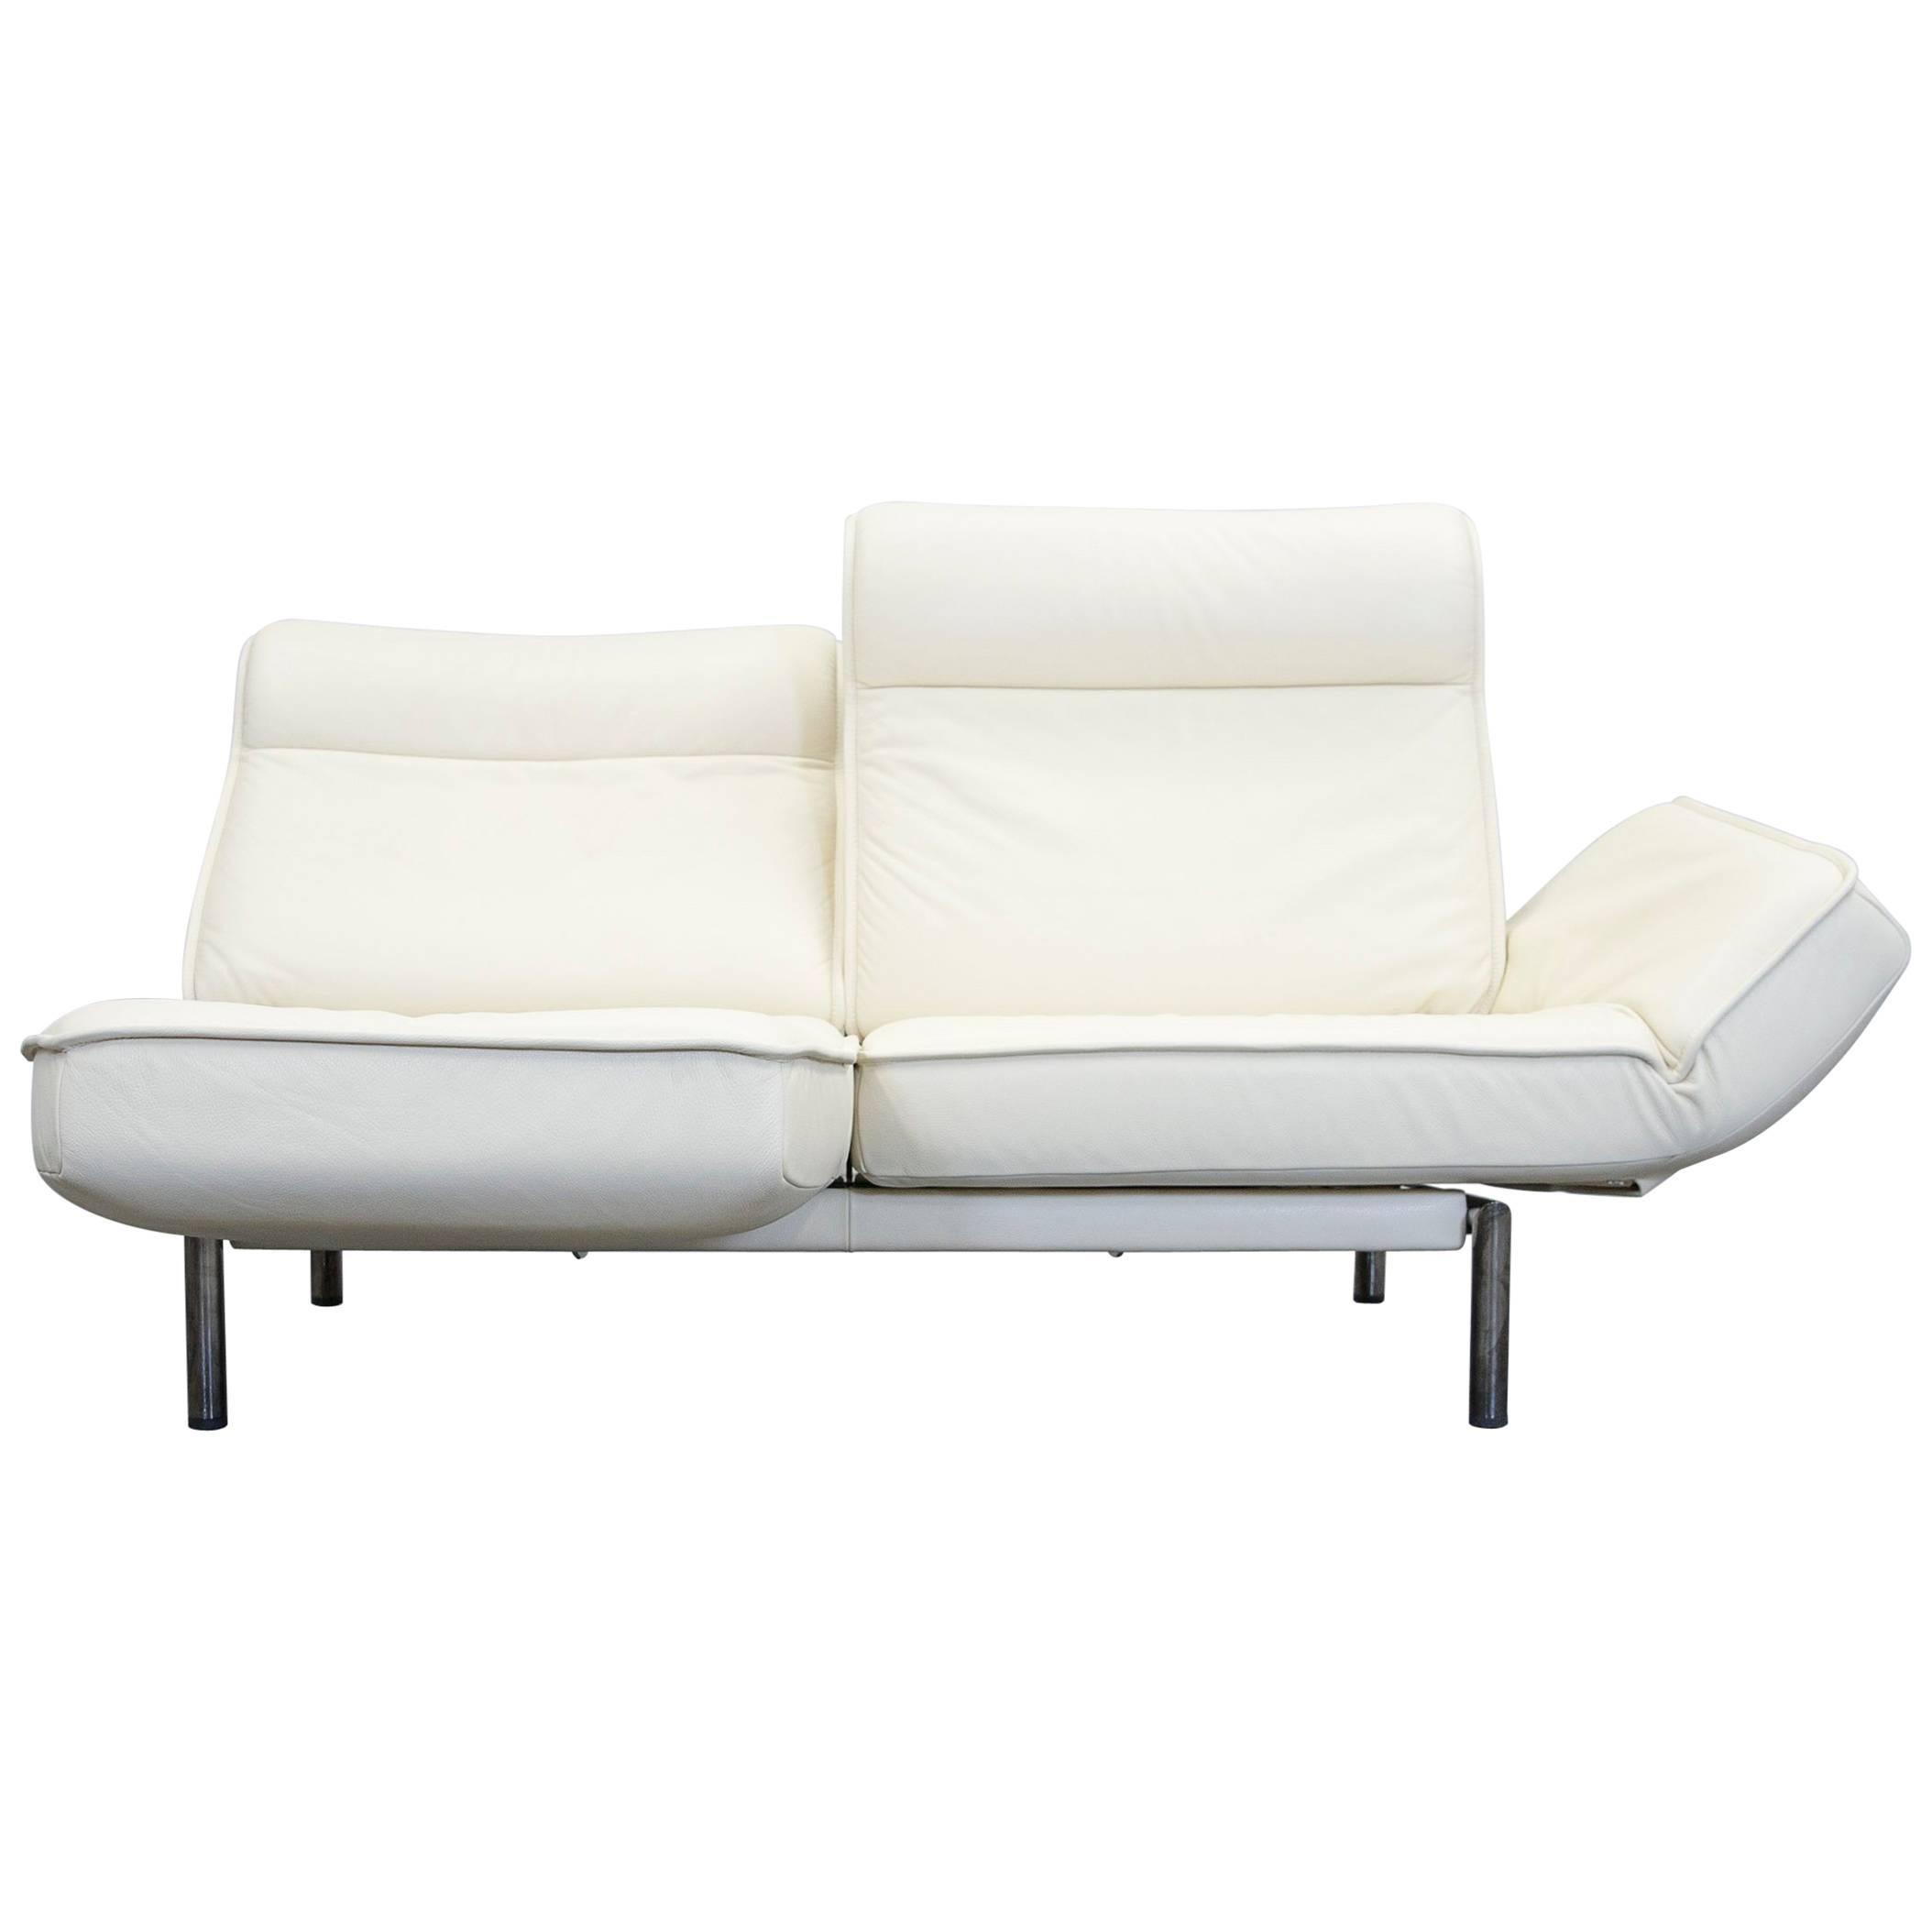 De Sede DS 450 Designer Leather Sofa Creme Relax Function Two-Seat Modern For Sale